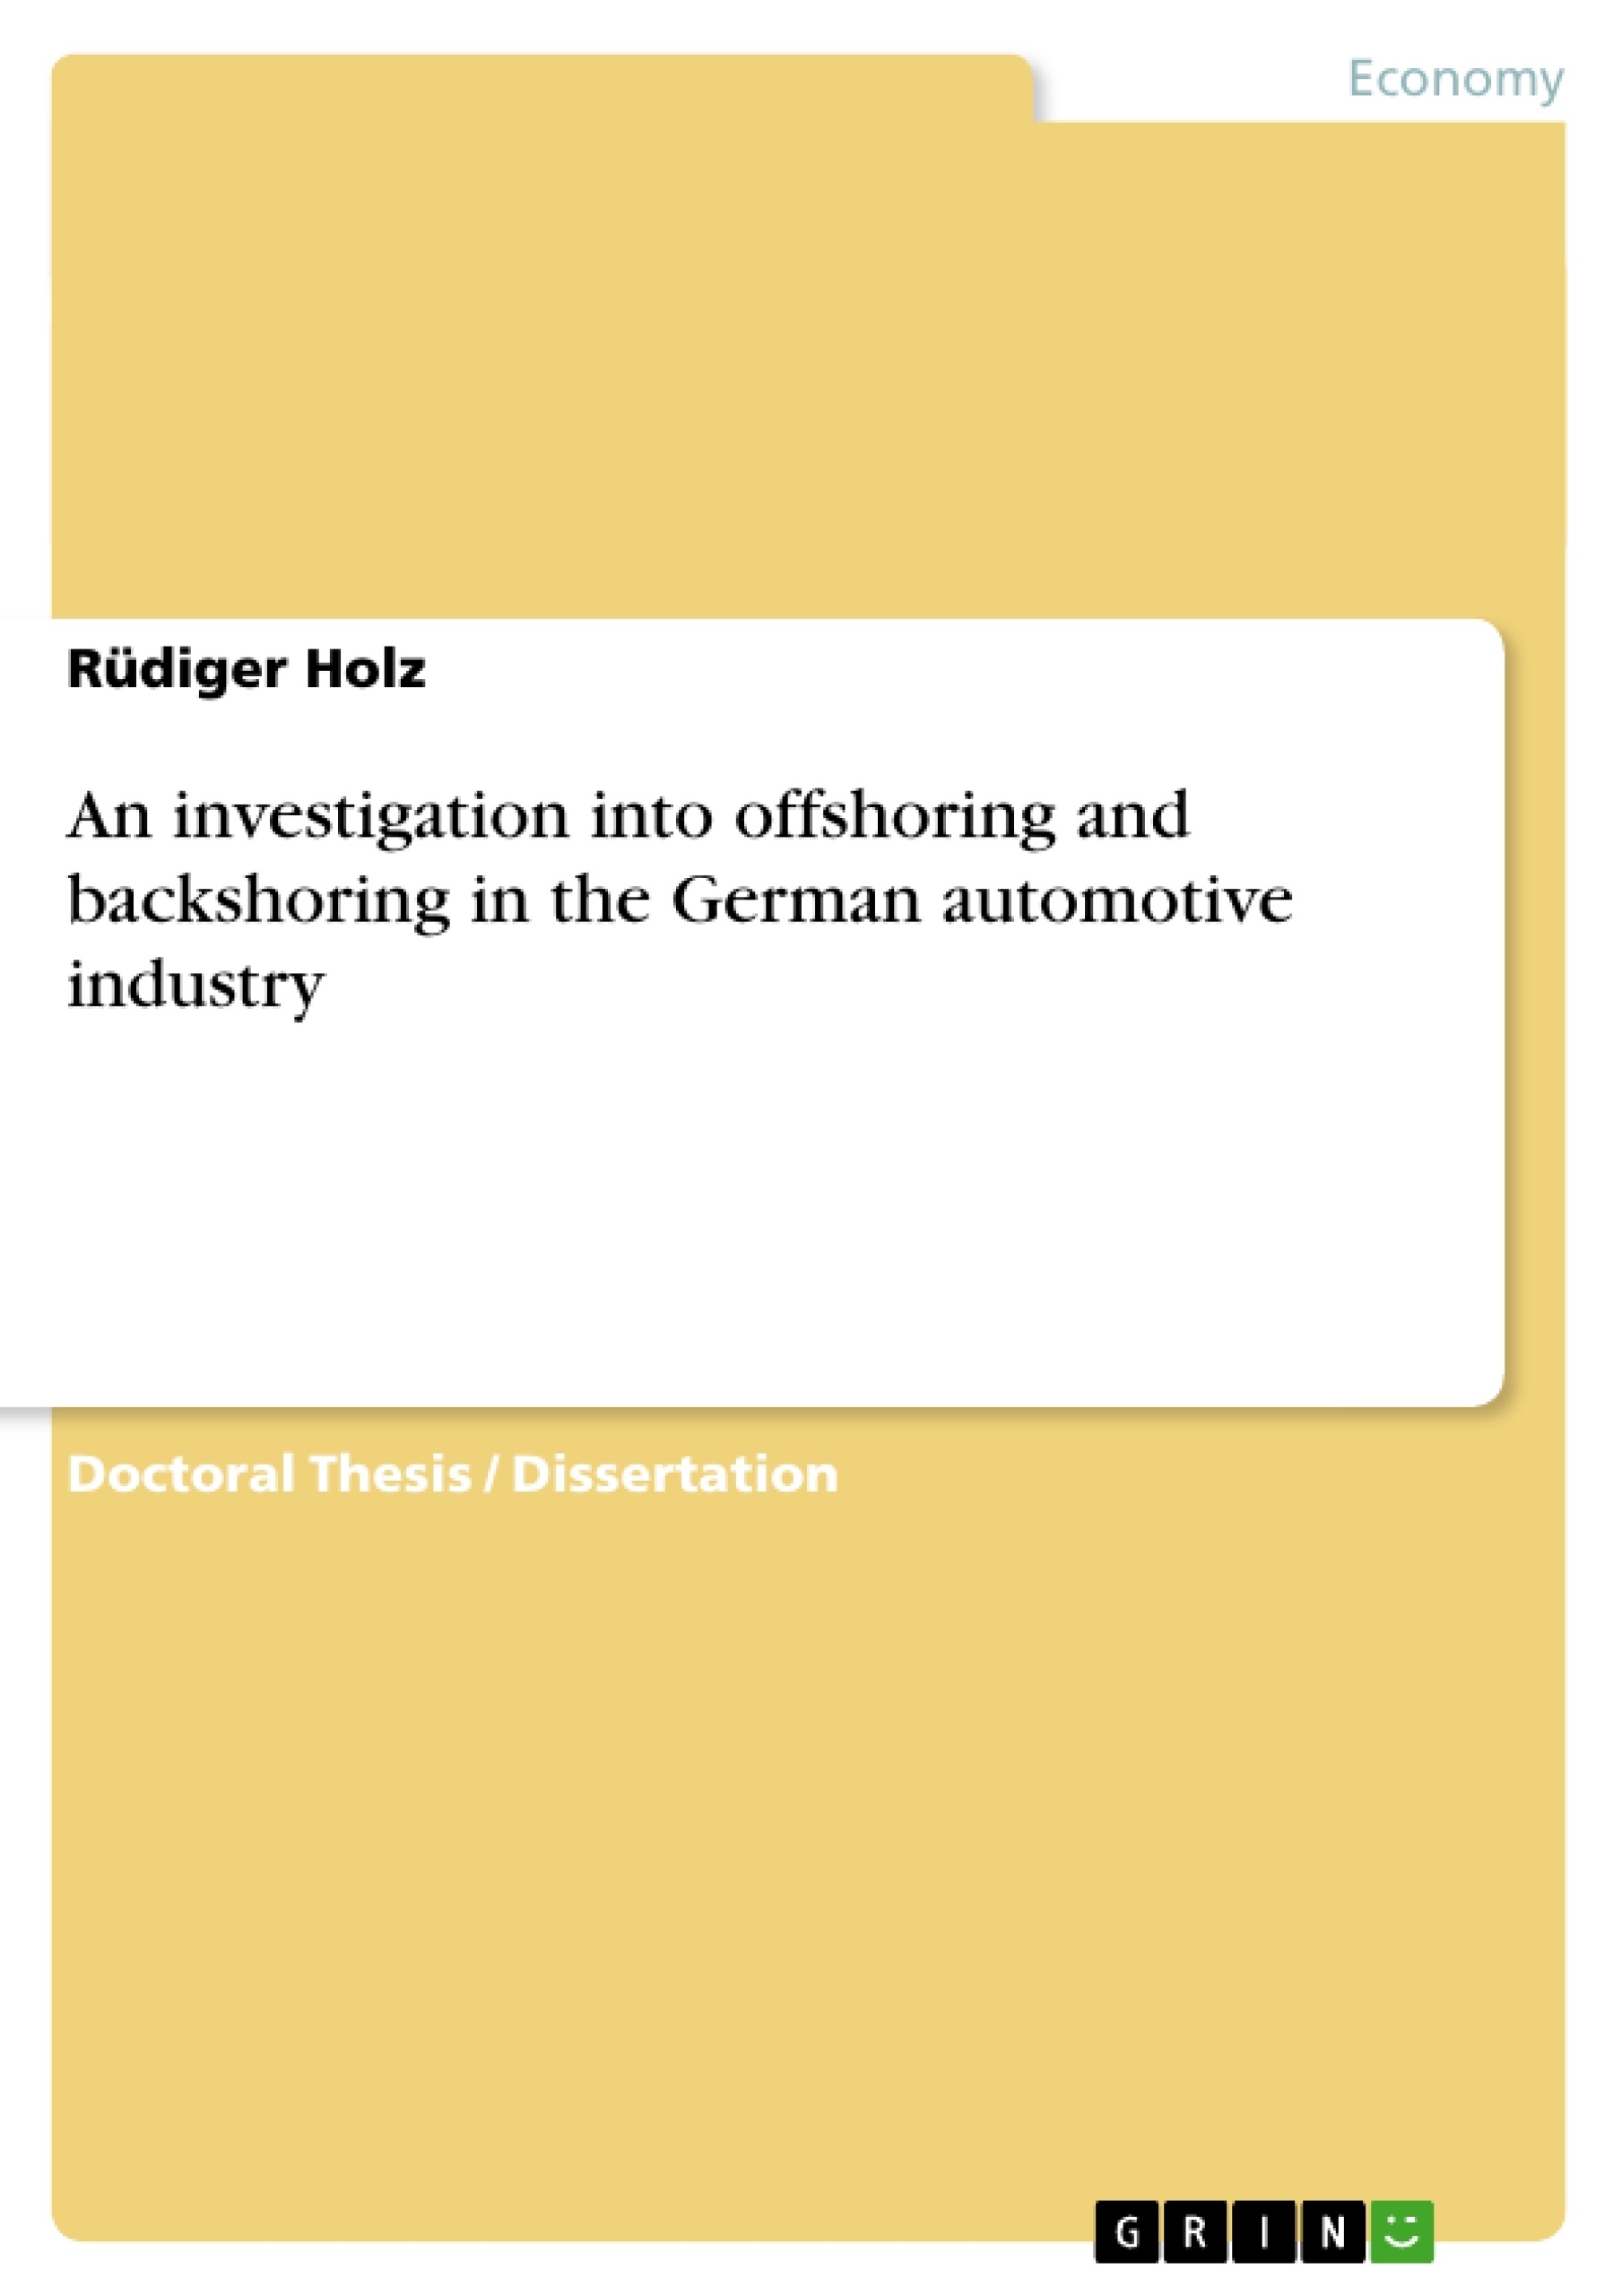 Title: An investigation into offshoring and backshoring in the German automotive industry